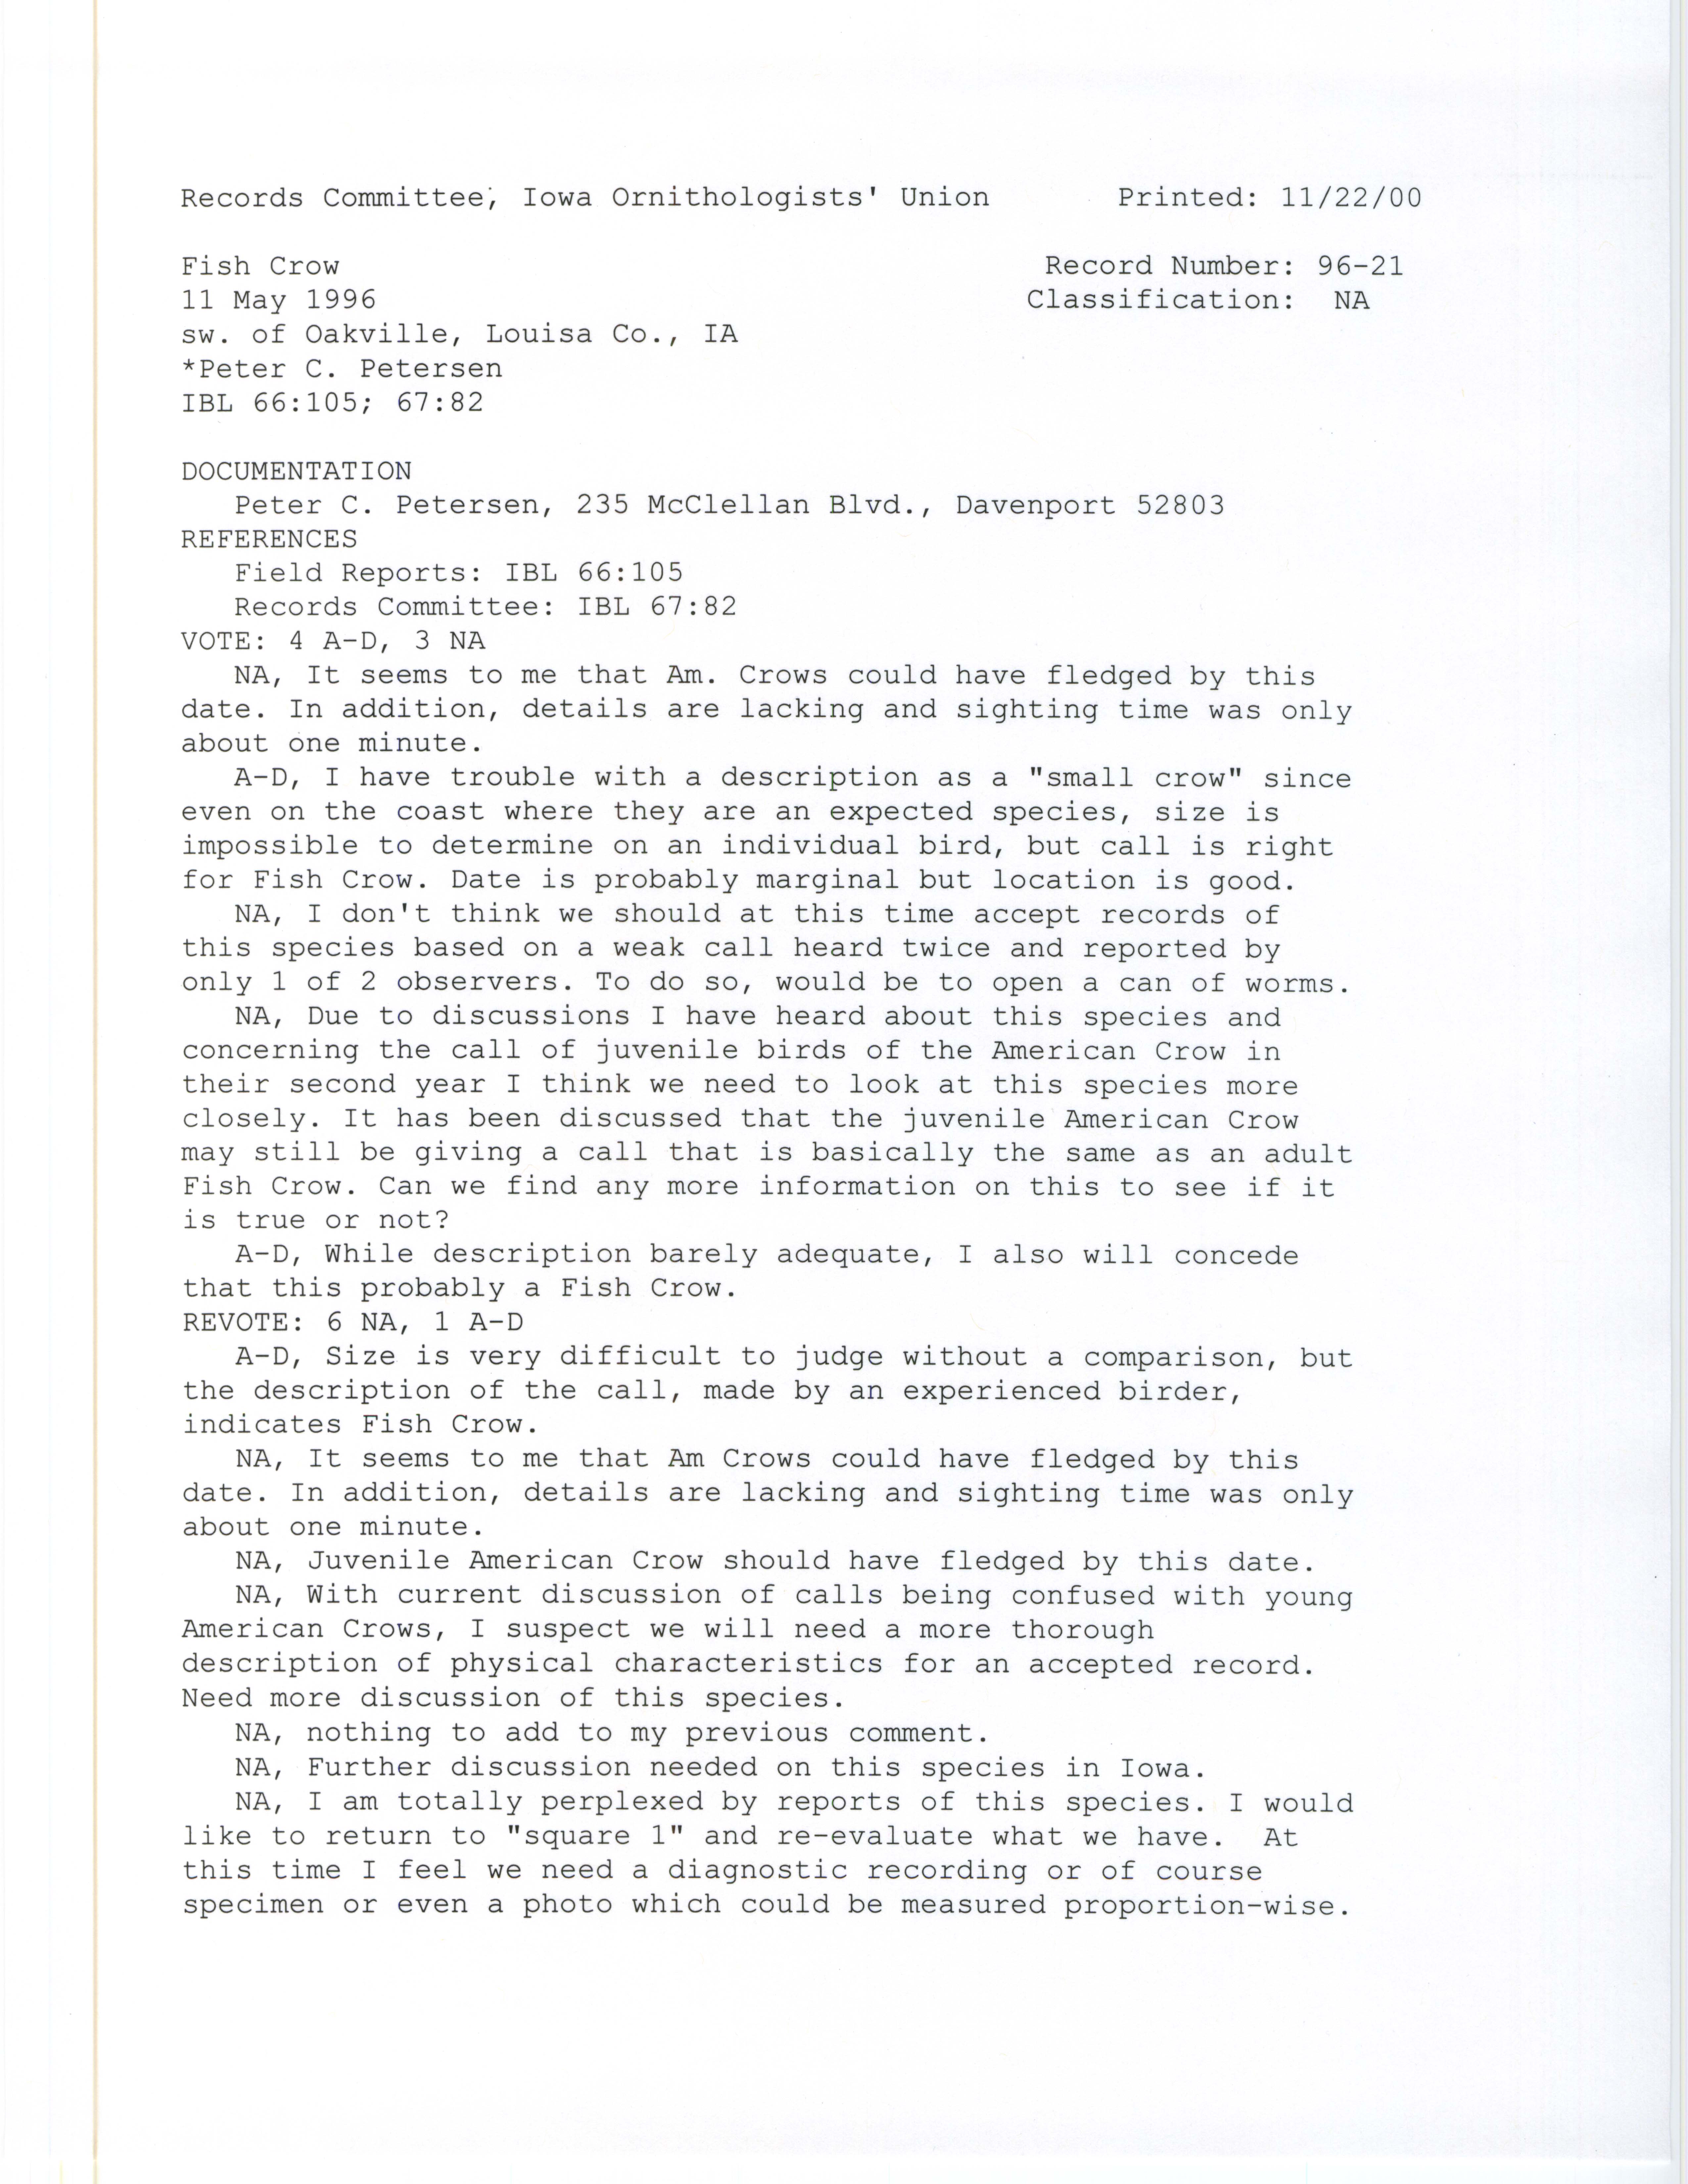 Records Committee review for rare bird sighting for Fish Crow southwest of Oakville, 1996